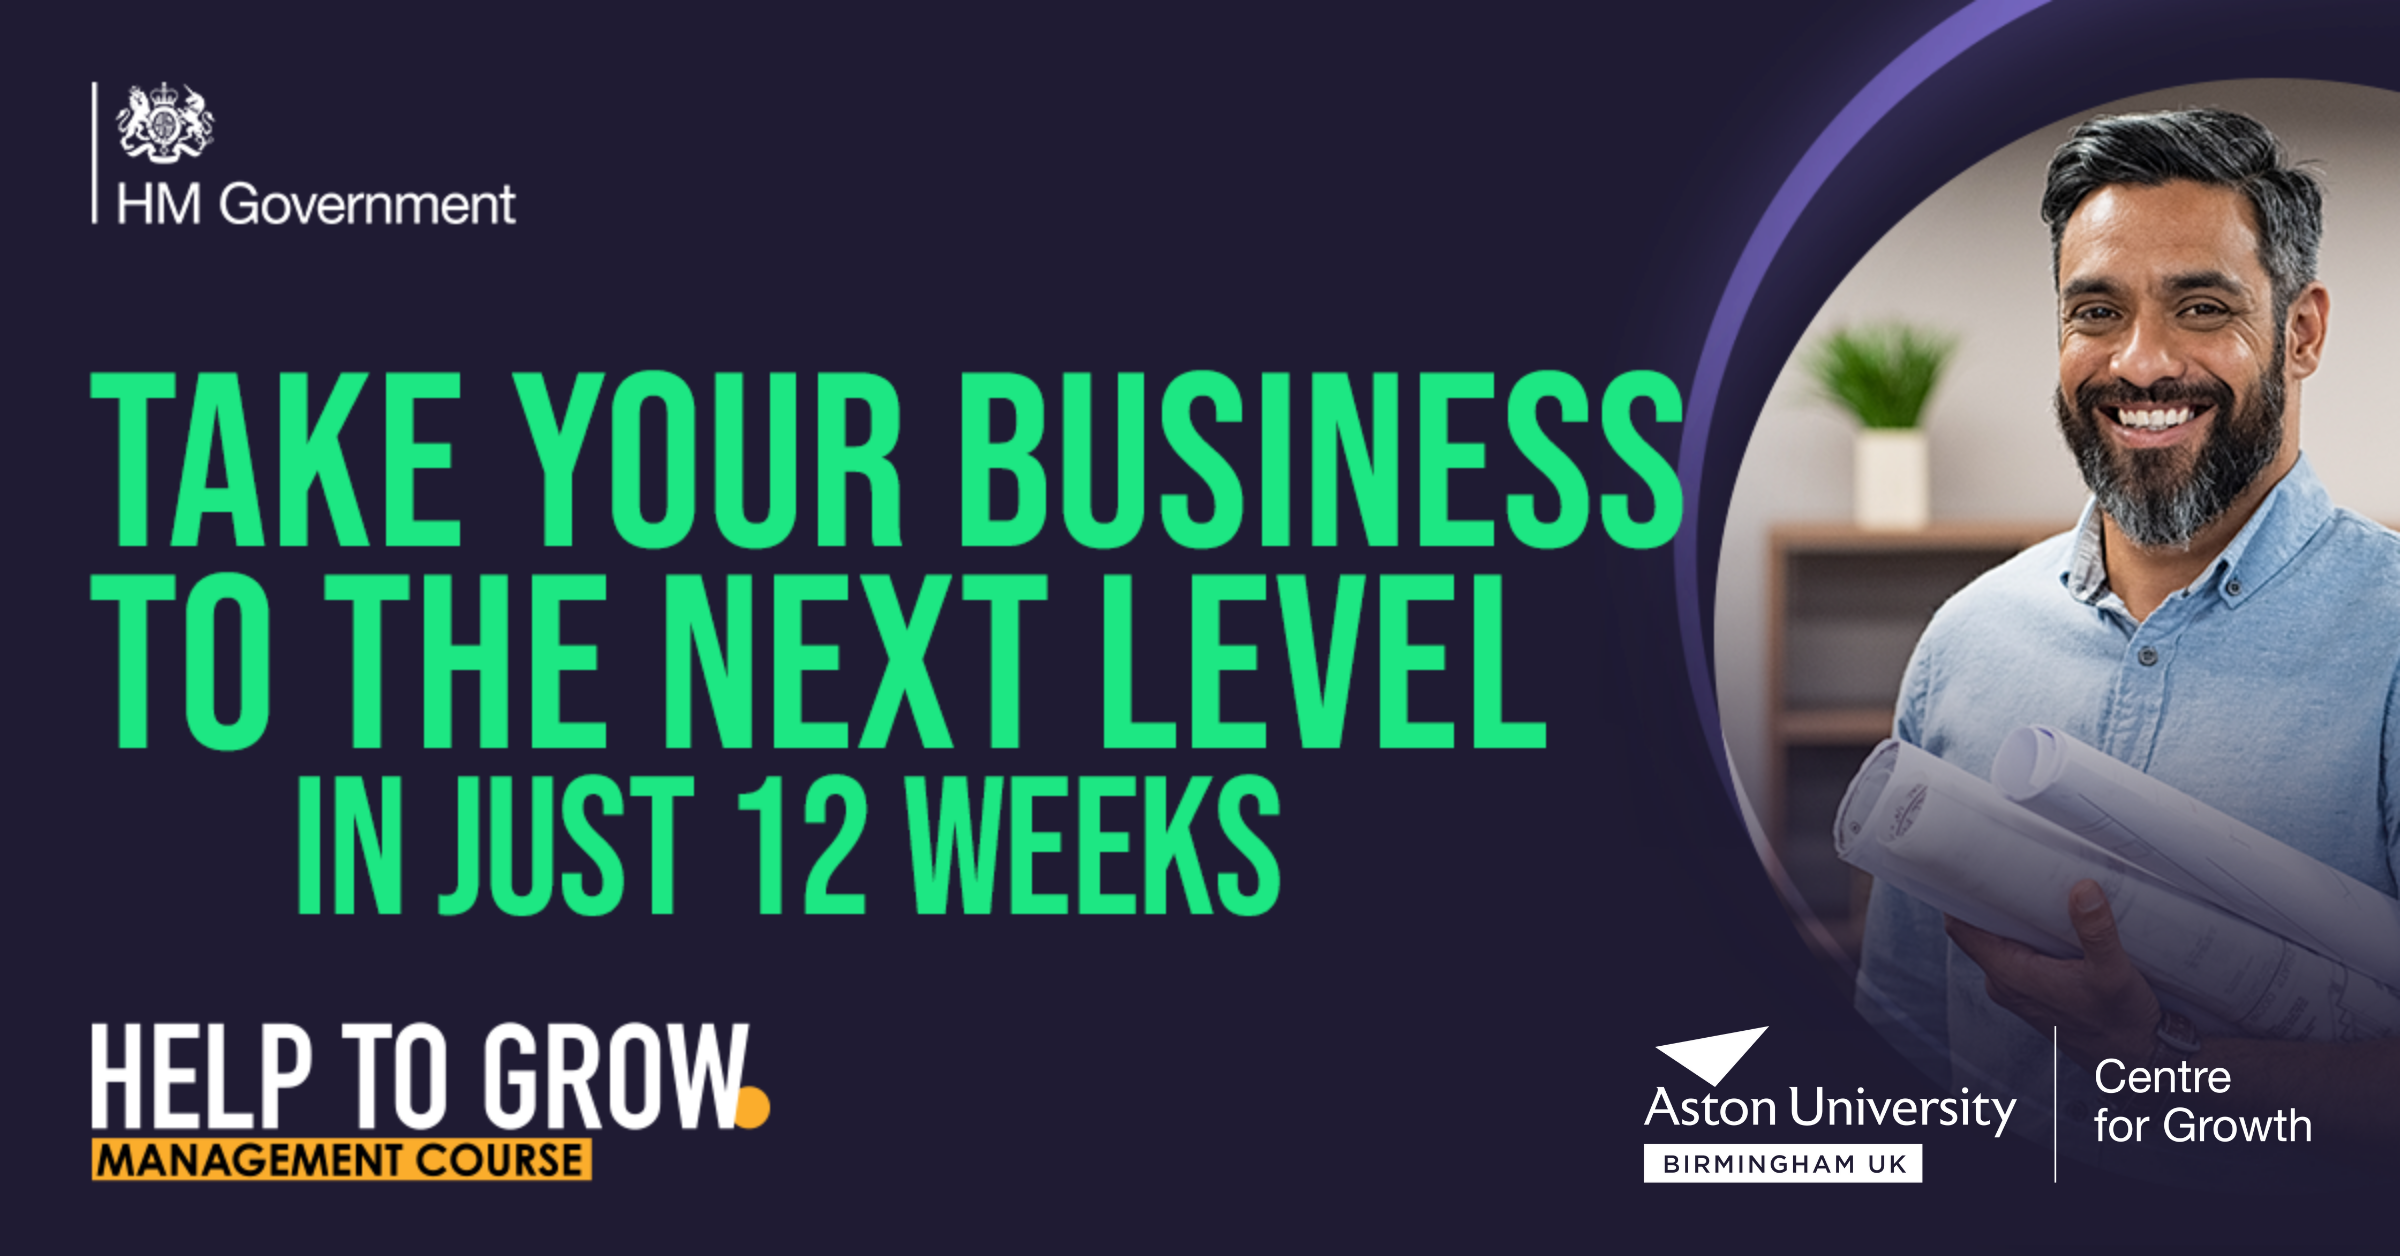 Help to Grow Management Course – Aston Centre for Growth